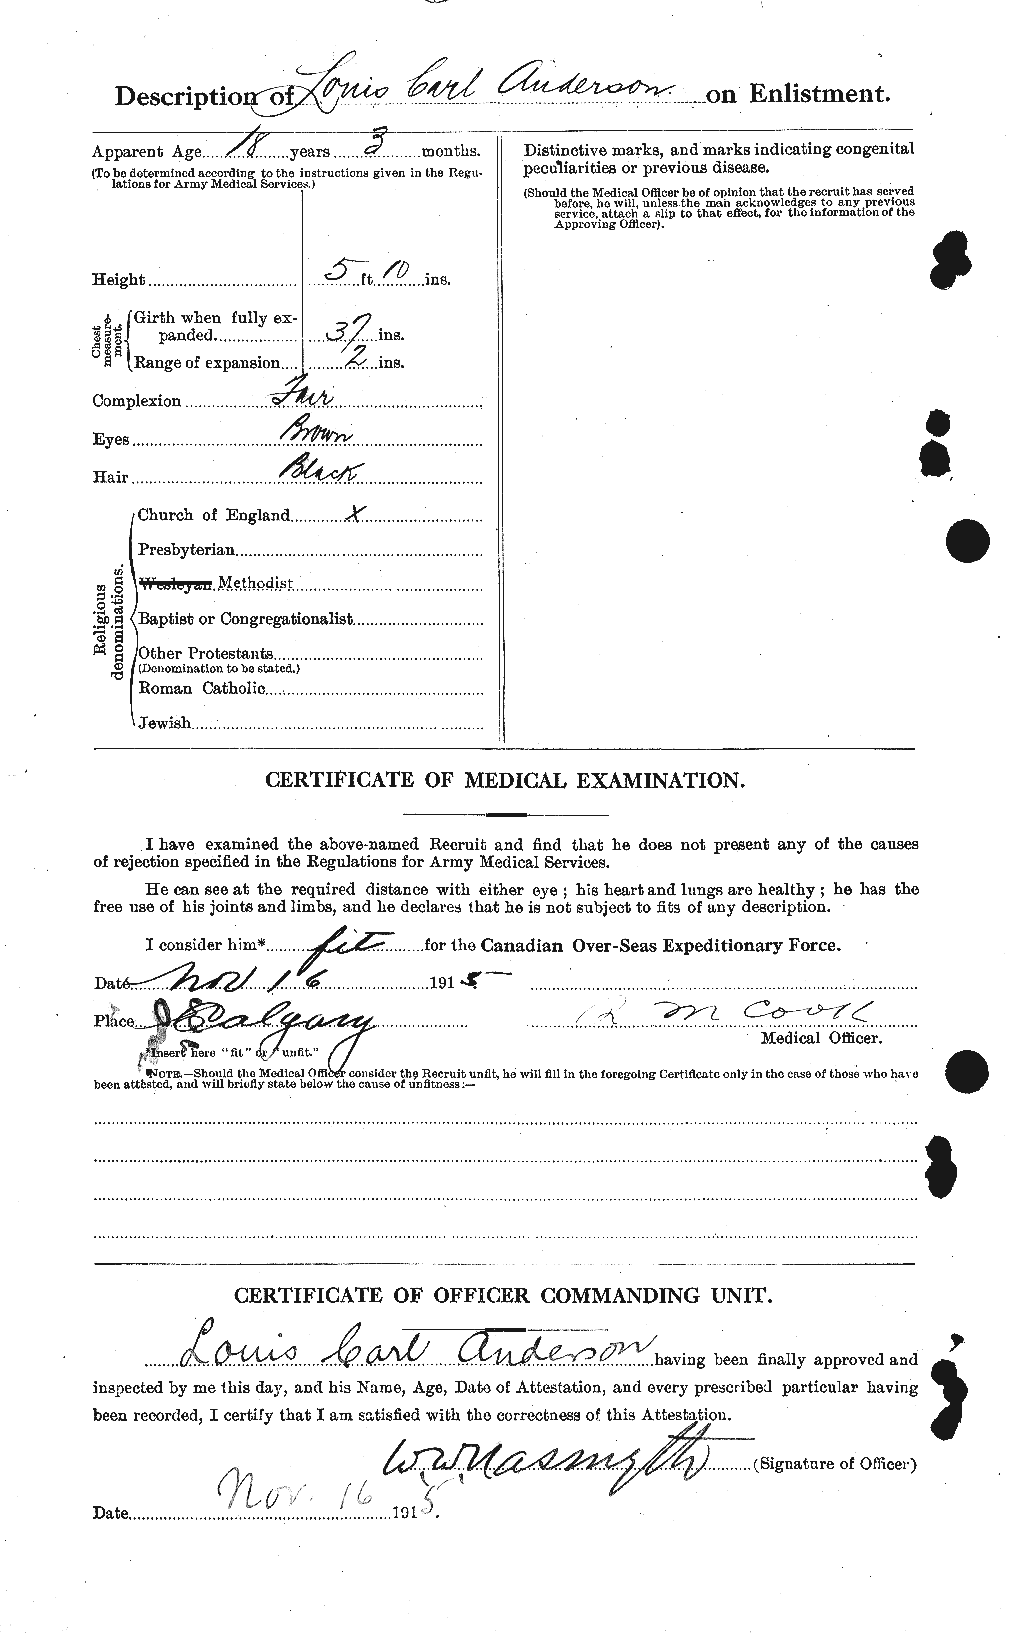 Personnel Records of the First World War - CEF 207500b